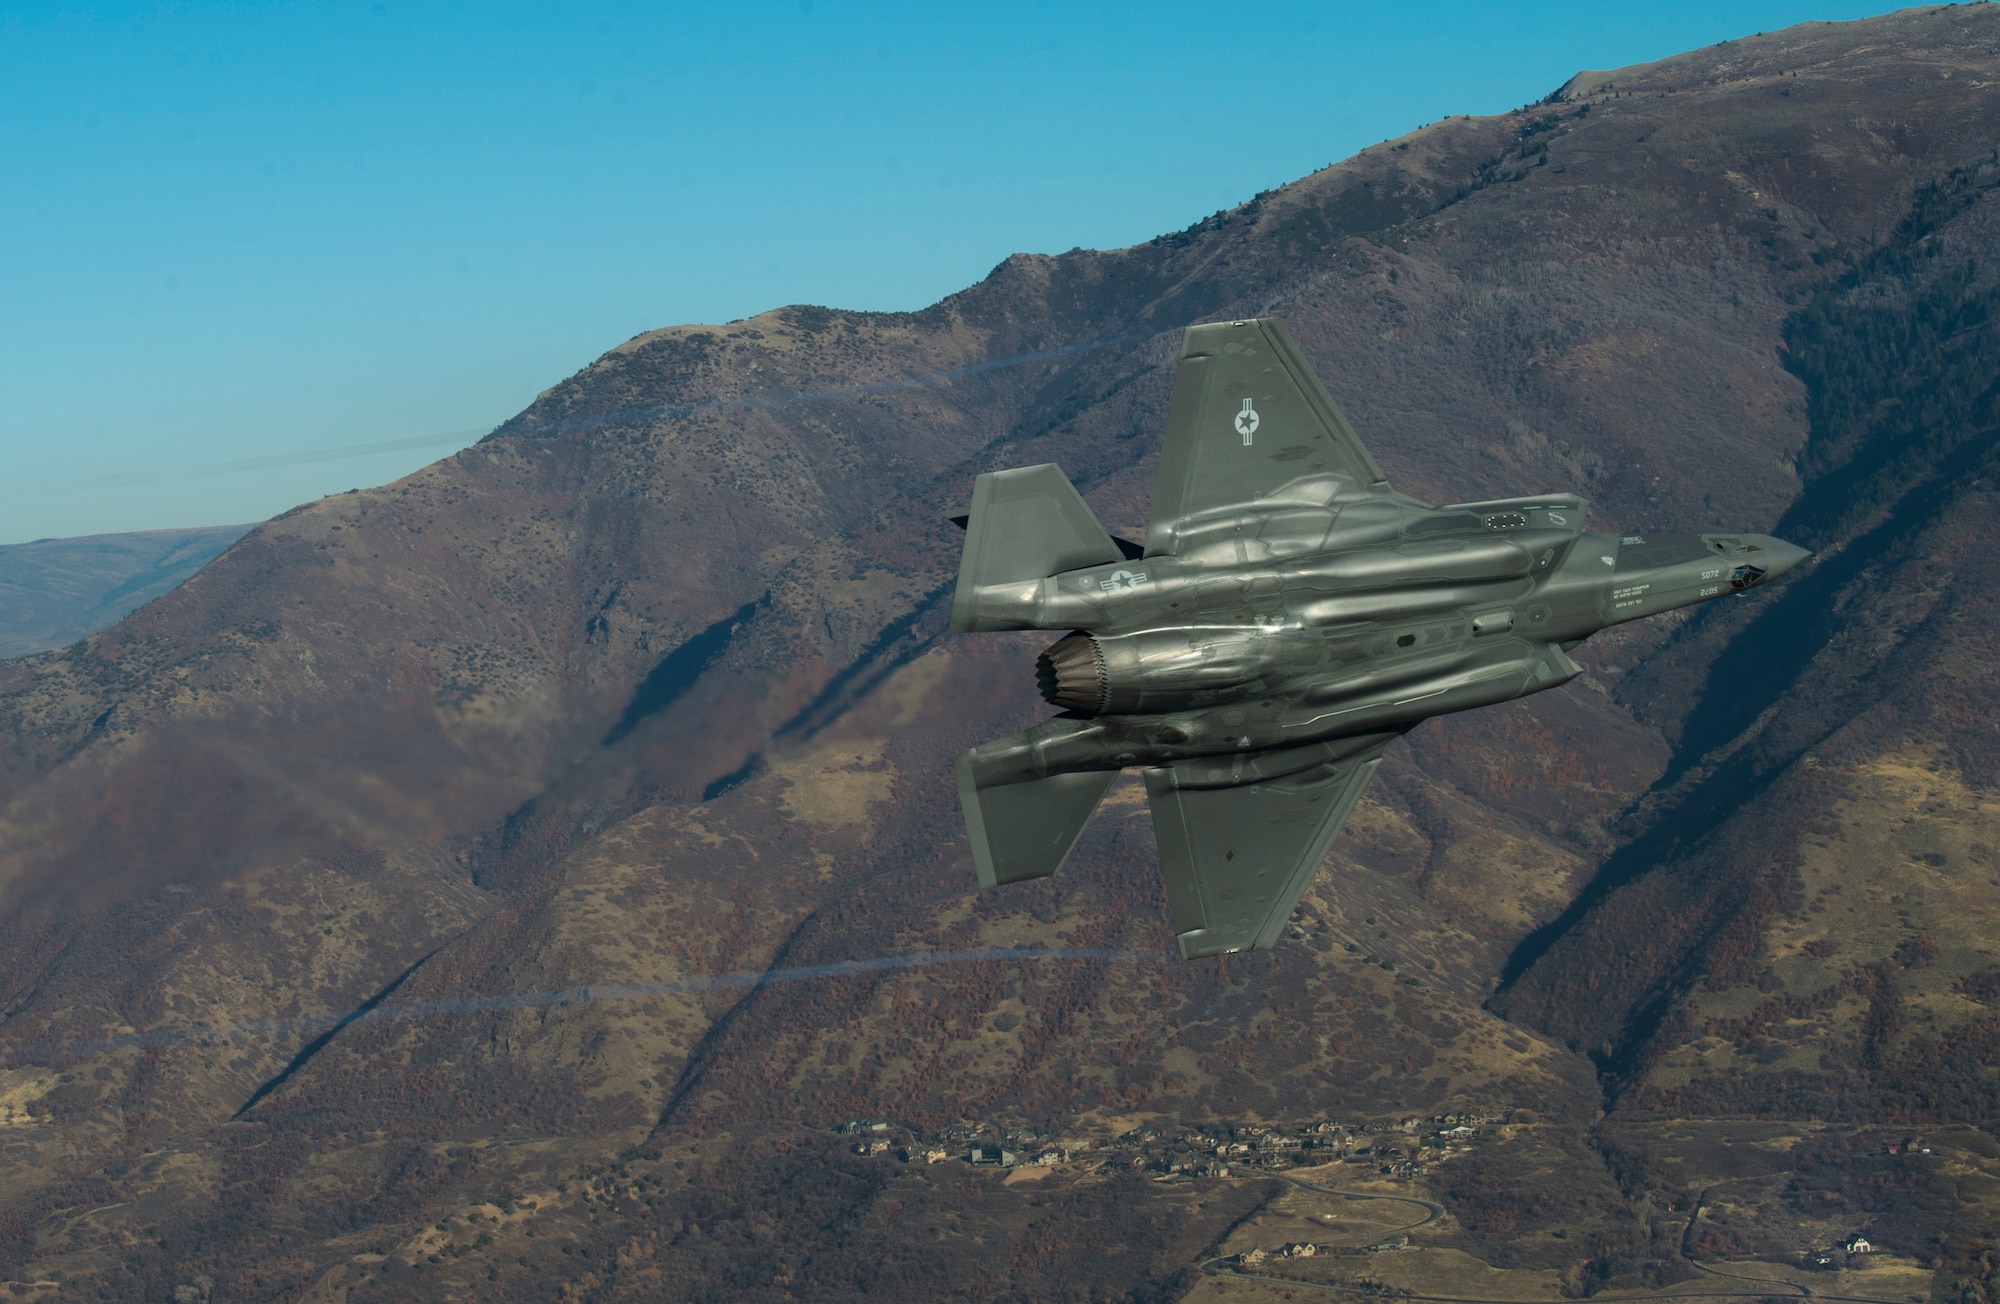 An F-35 Lightning II stationed at Hill Air Force Base performs aerial maneuvers during a combat power exercise over Hill Air Force Base, Nov. 19, 2018.